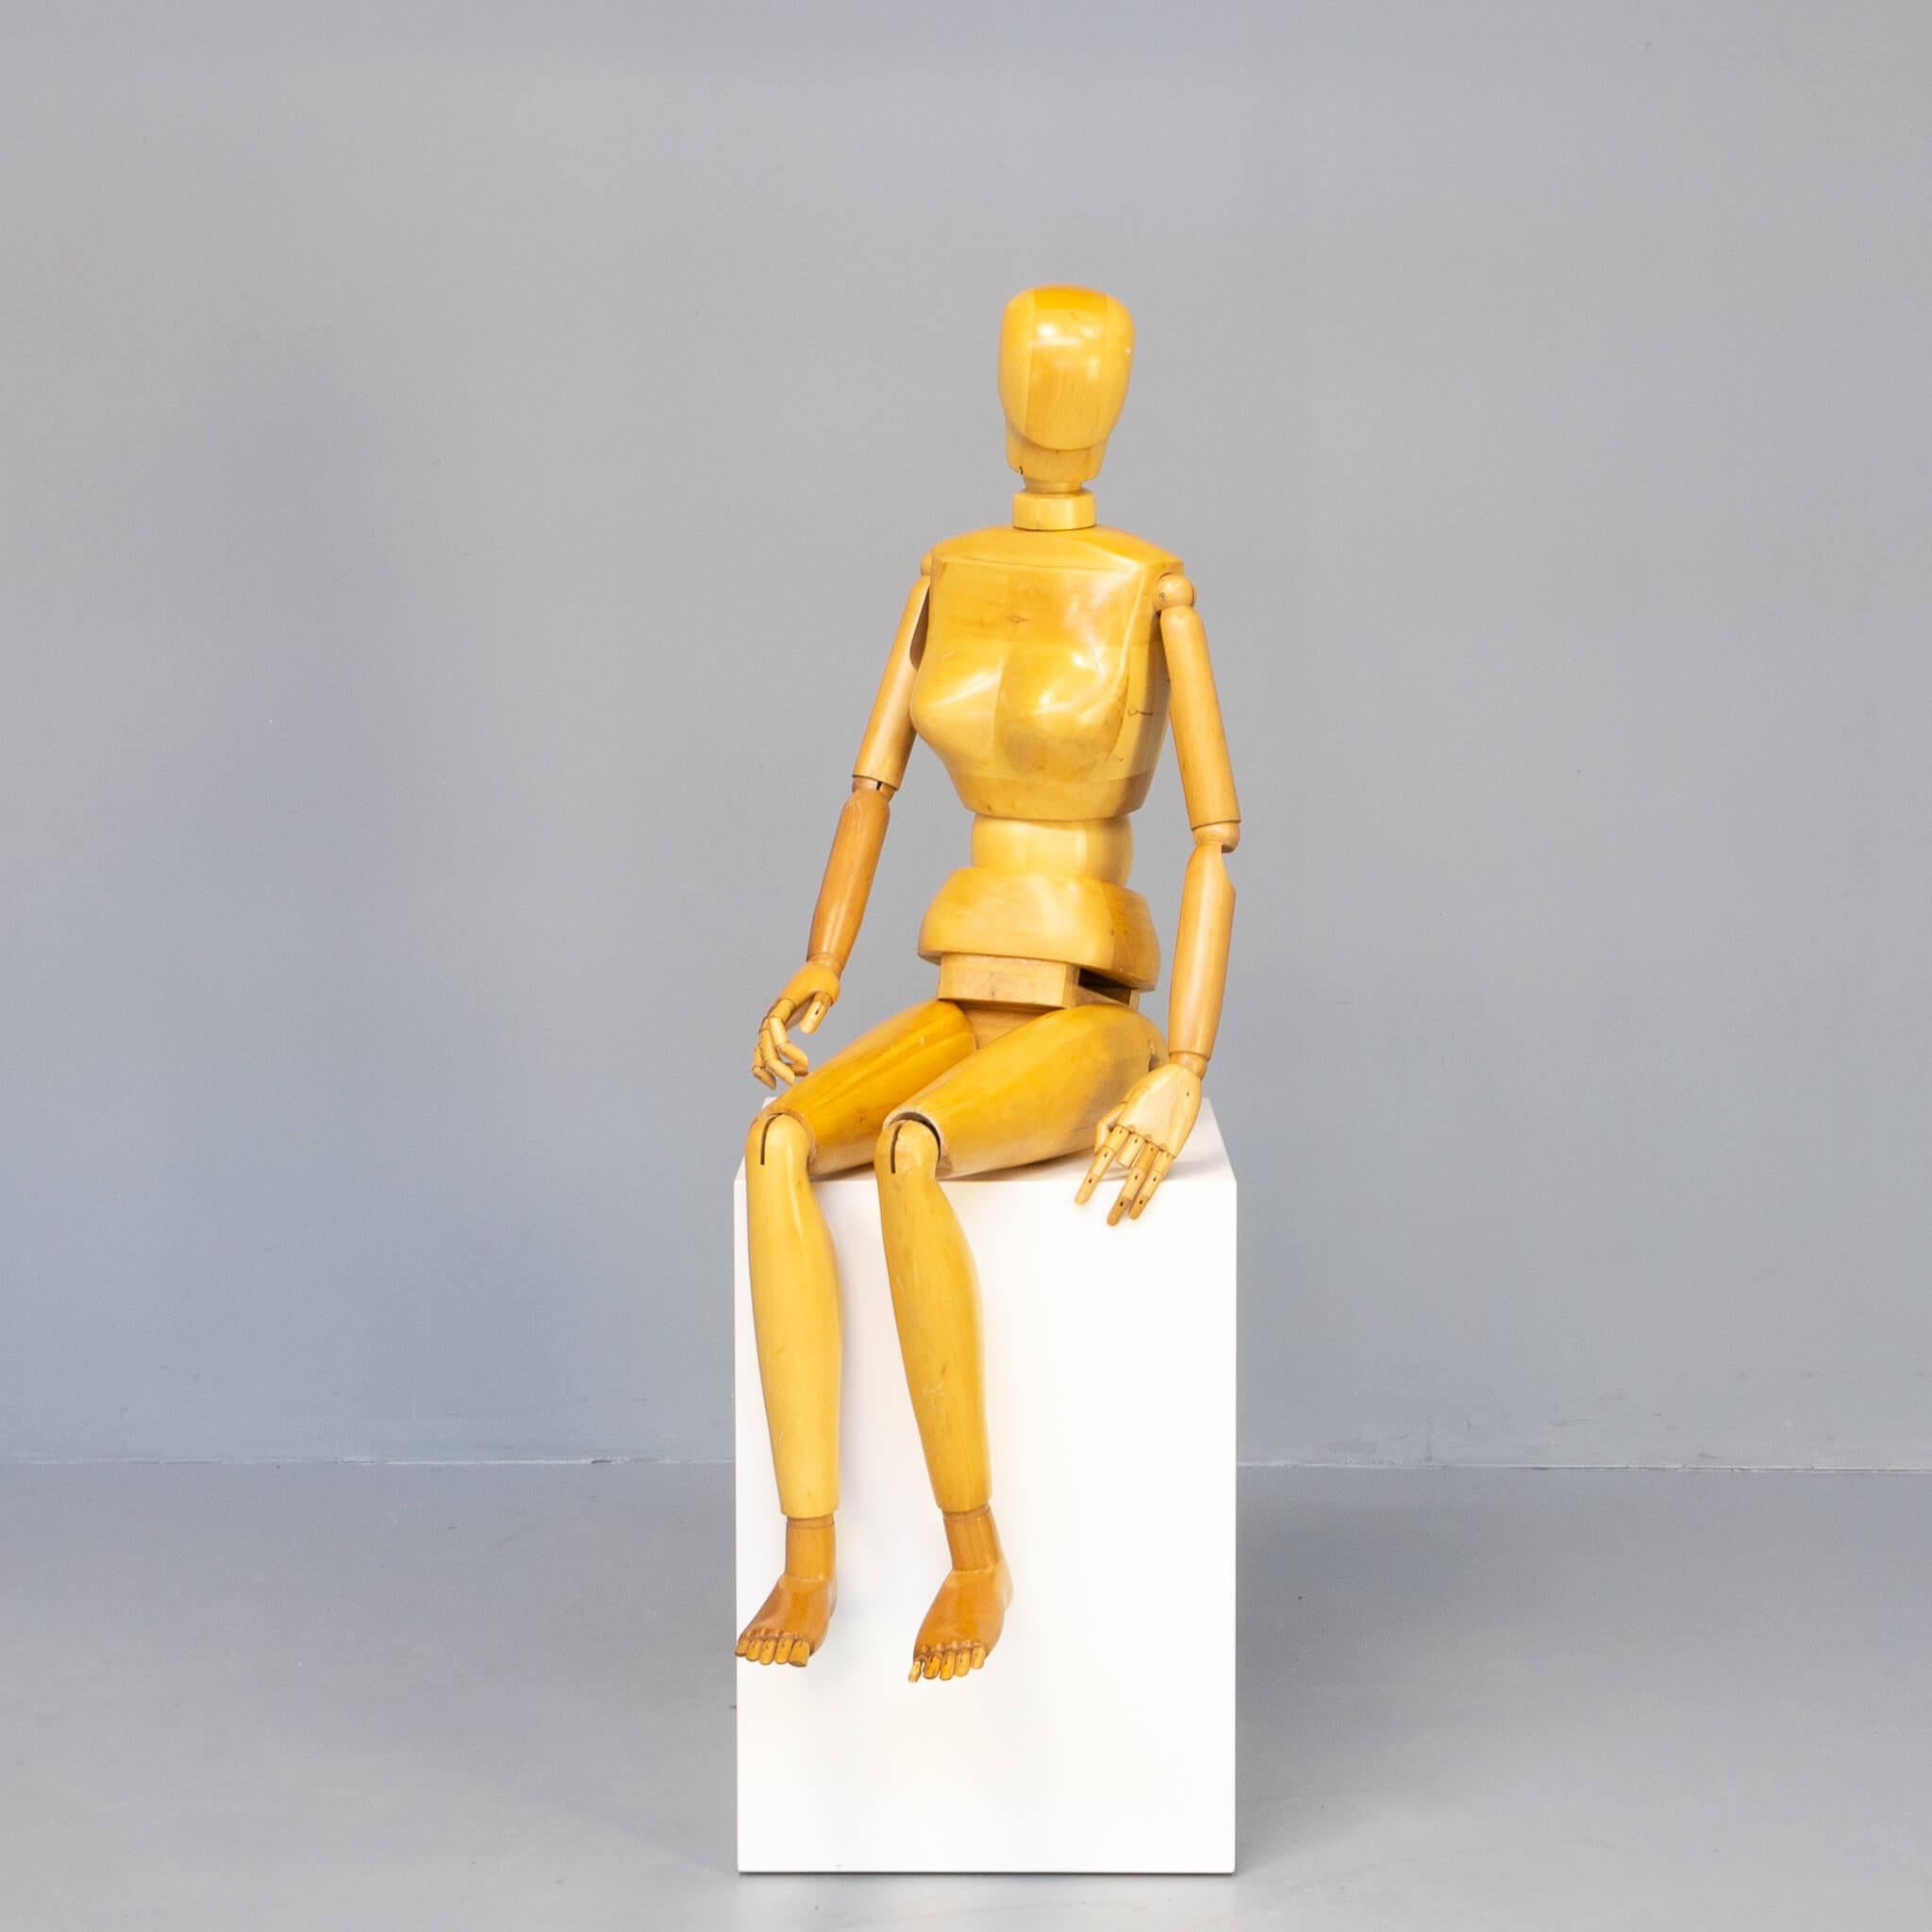 A life size beech wooden artist’s model or mannequin, with flexible fingers and too’s. All trunable parts of the human body are able to turn also. The mannequin comes without standing pole and has a few minor damages like a missing part of a finger,